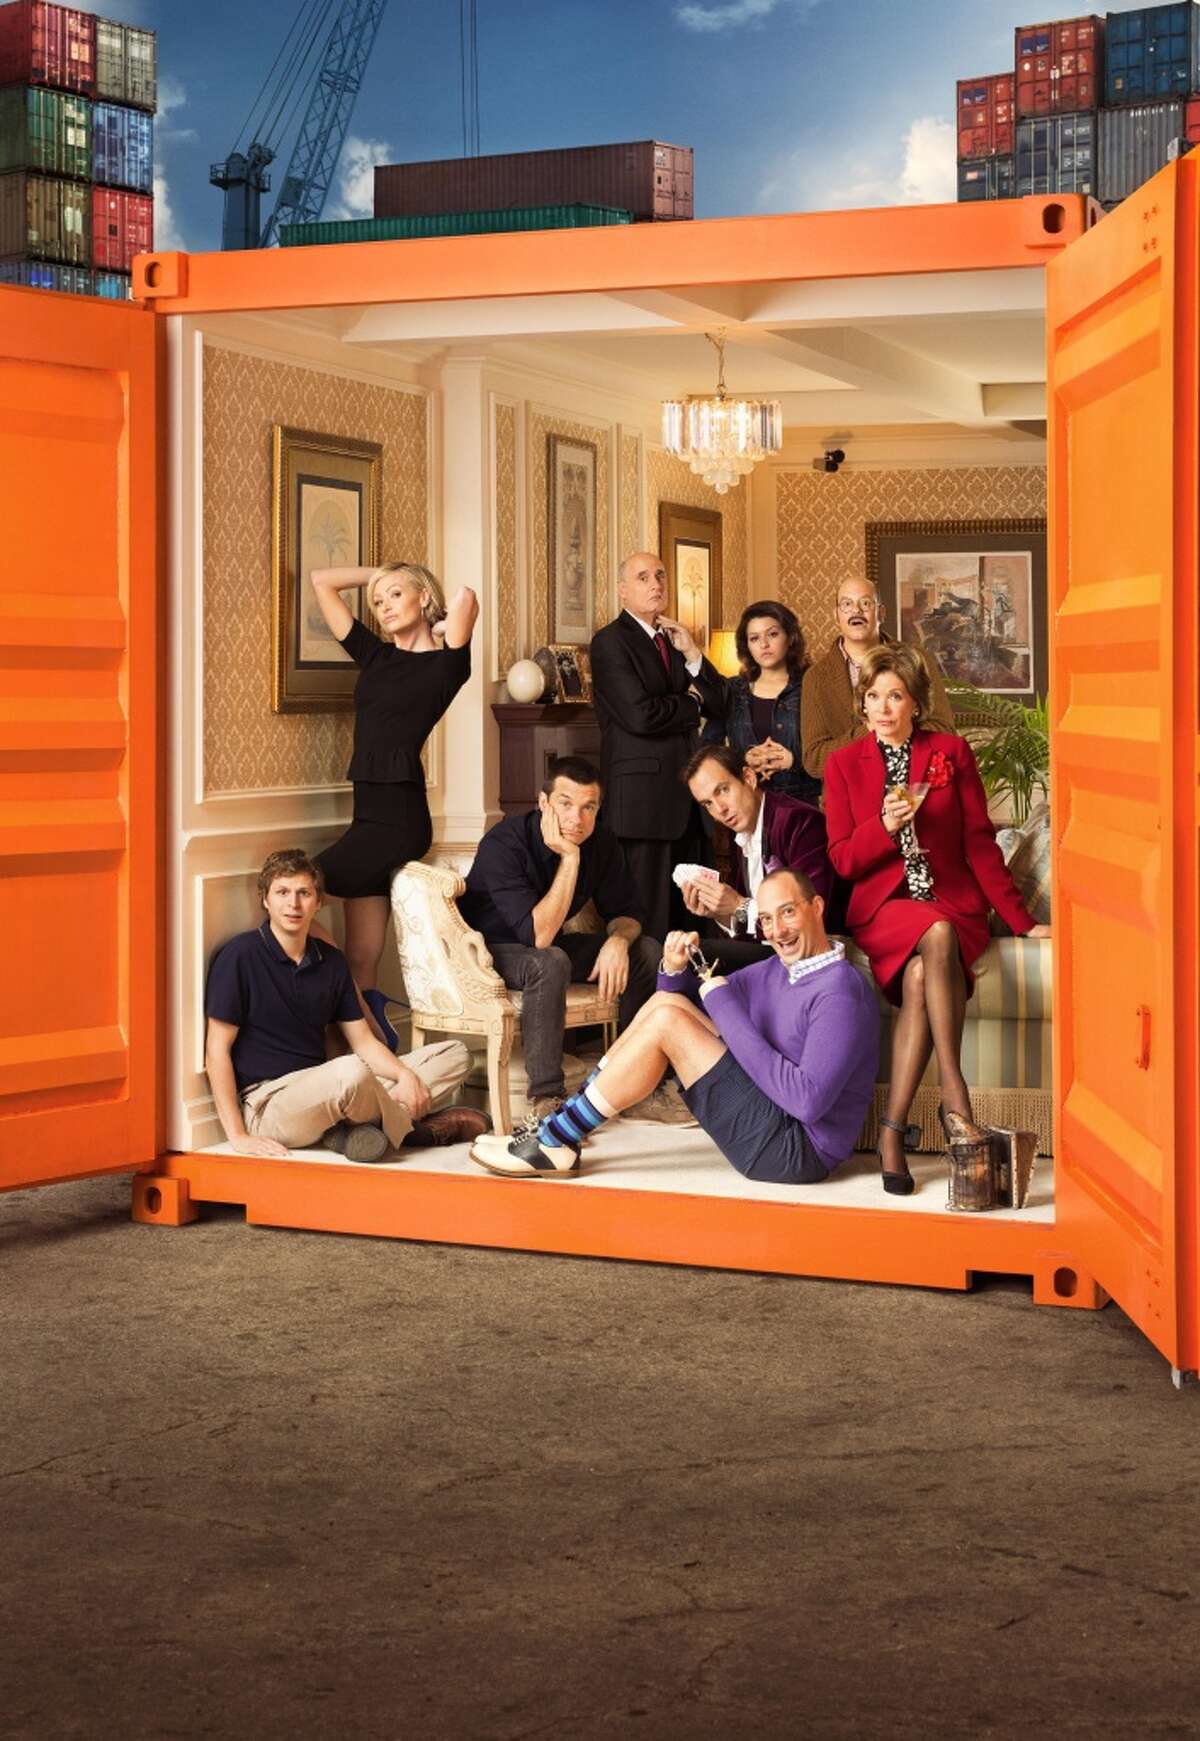 Arrested Development: Tuesday, May 29 The Bluth family are back together, and finally getting the award they think they deserve - for family of the year. A development which will help Lindsay as she begins her campaign for Congress, to become ‘part of the problem’. But whatever happens, Michael will always come back to save the family. Probably. (Netflix)